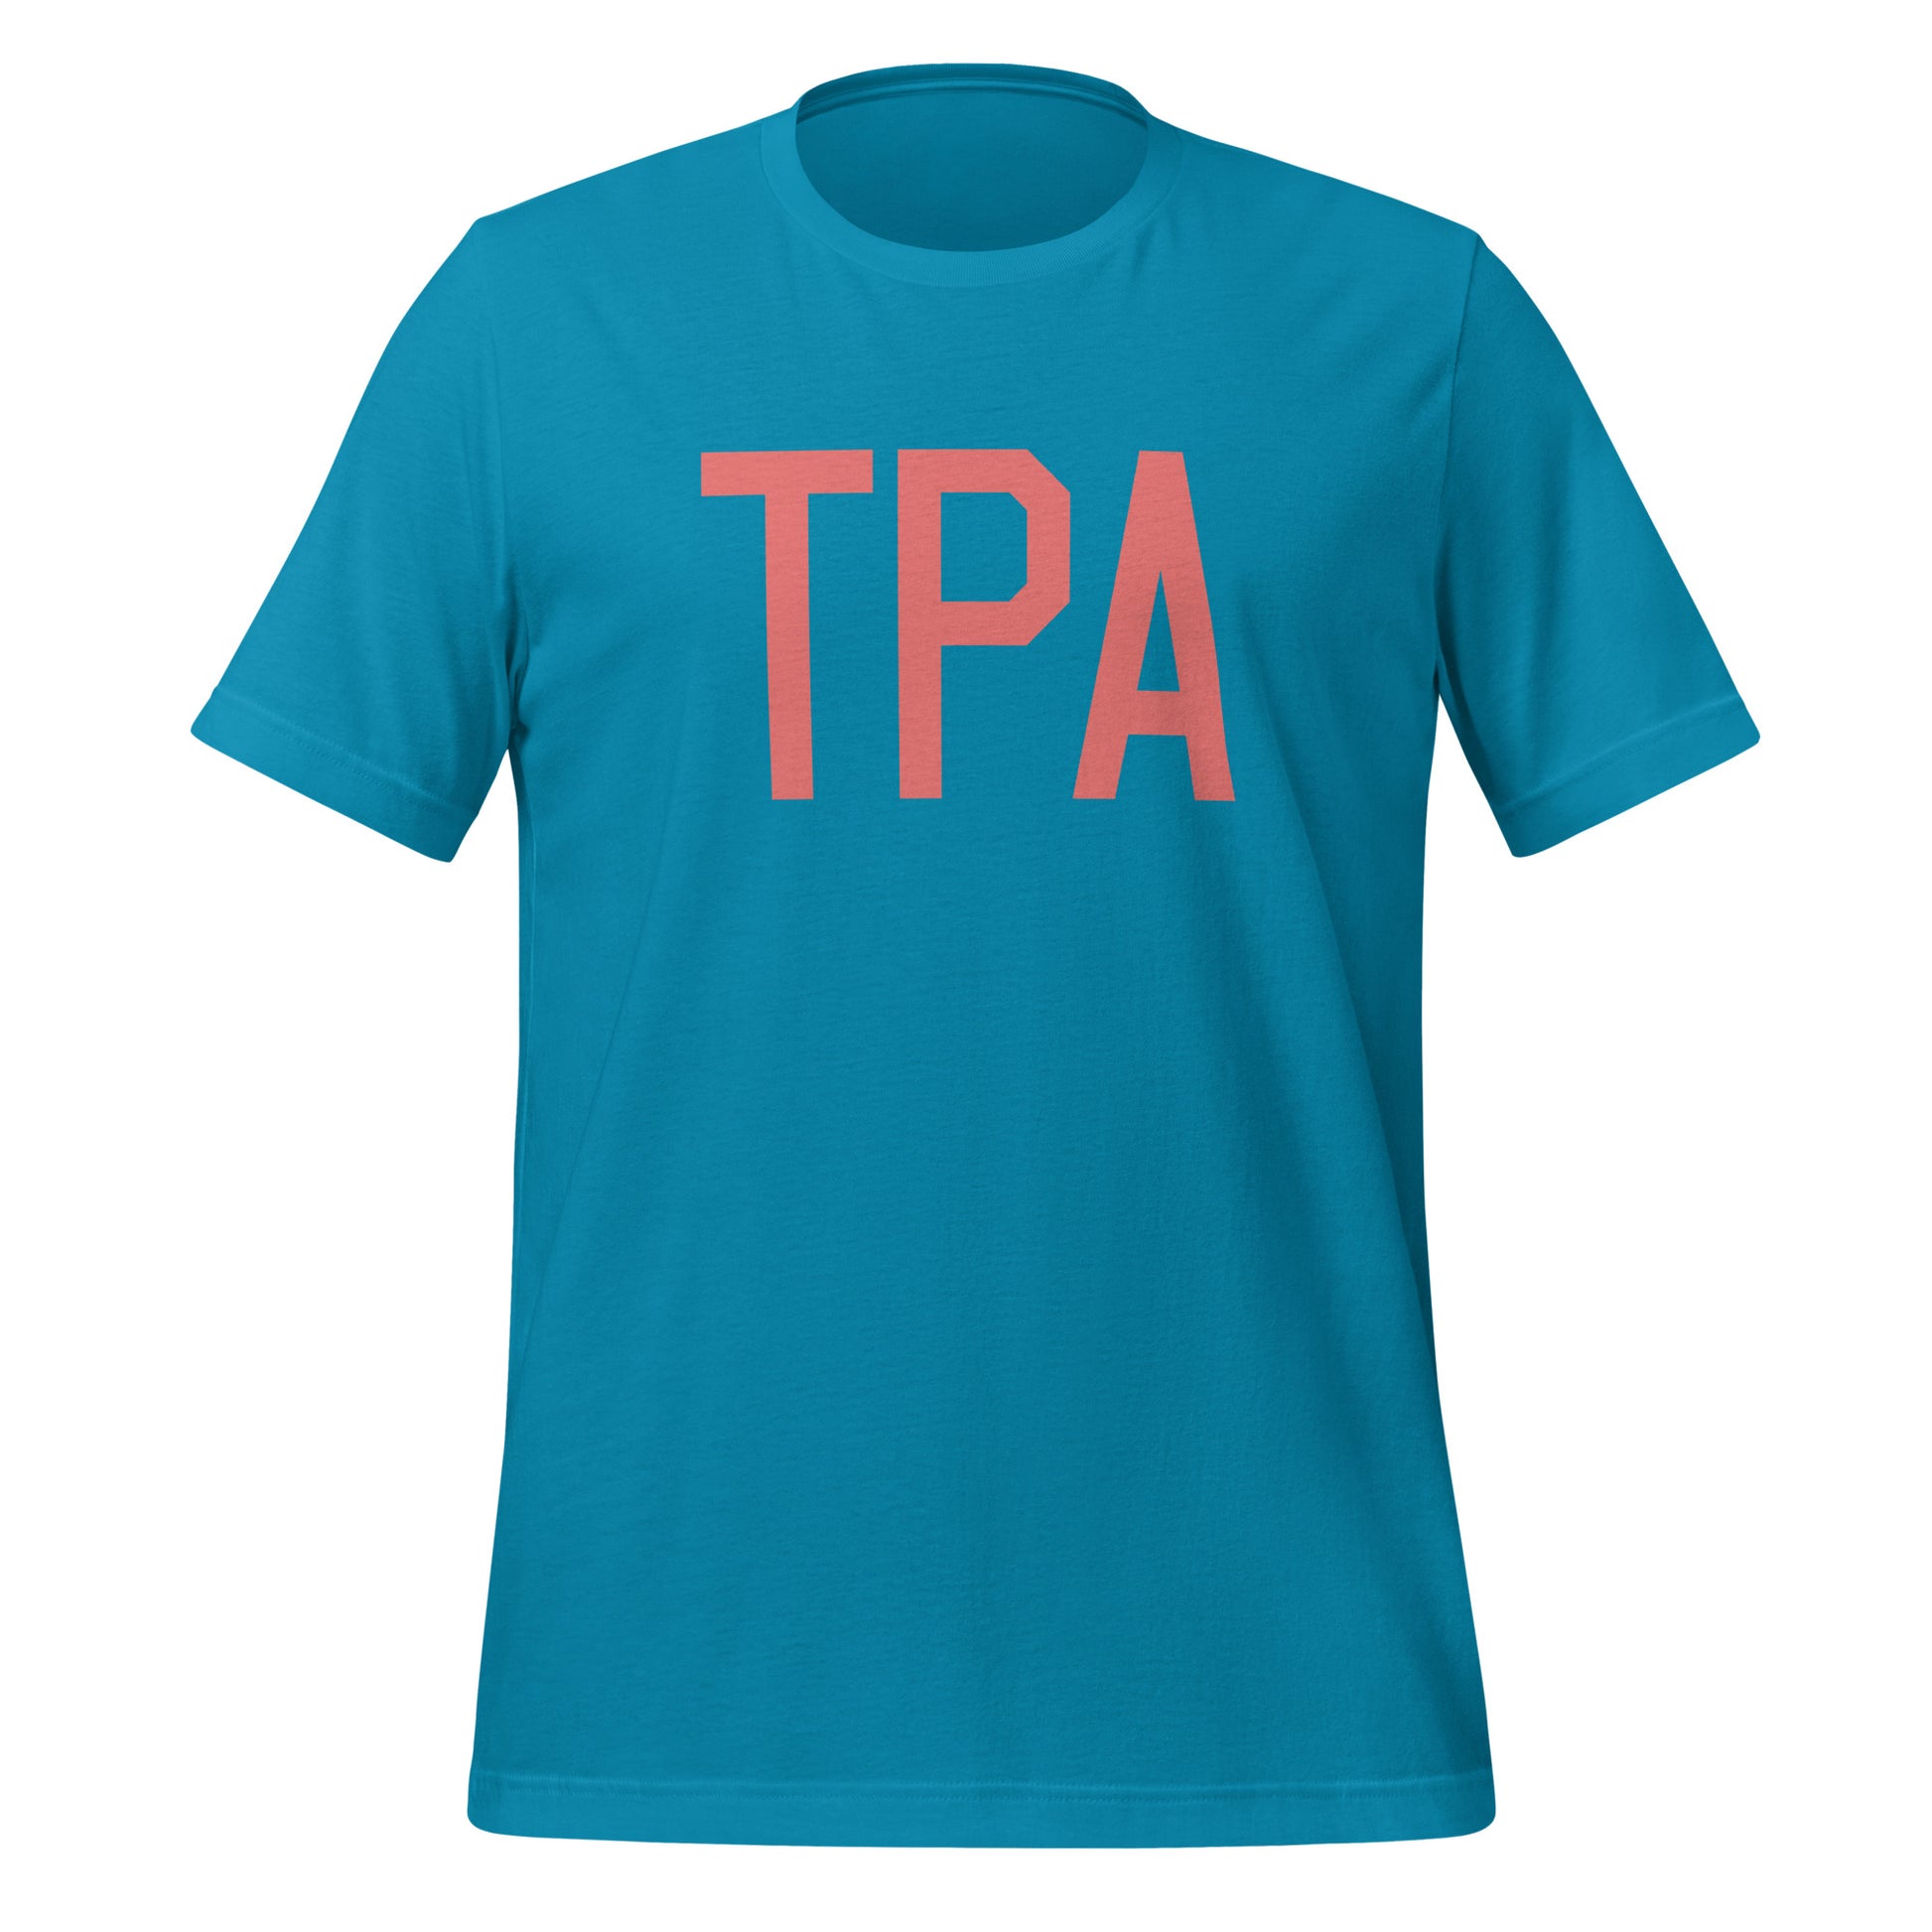 Aviation Enthusiast Unisex Tee - Pink Graphic • TPA Tampa • YHM Designs - Image 06